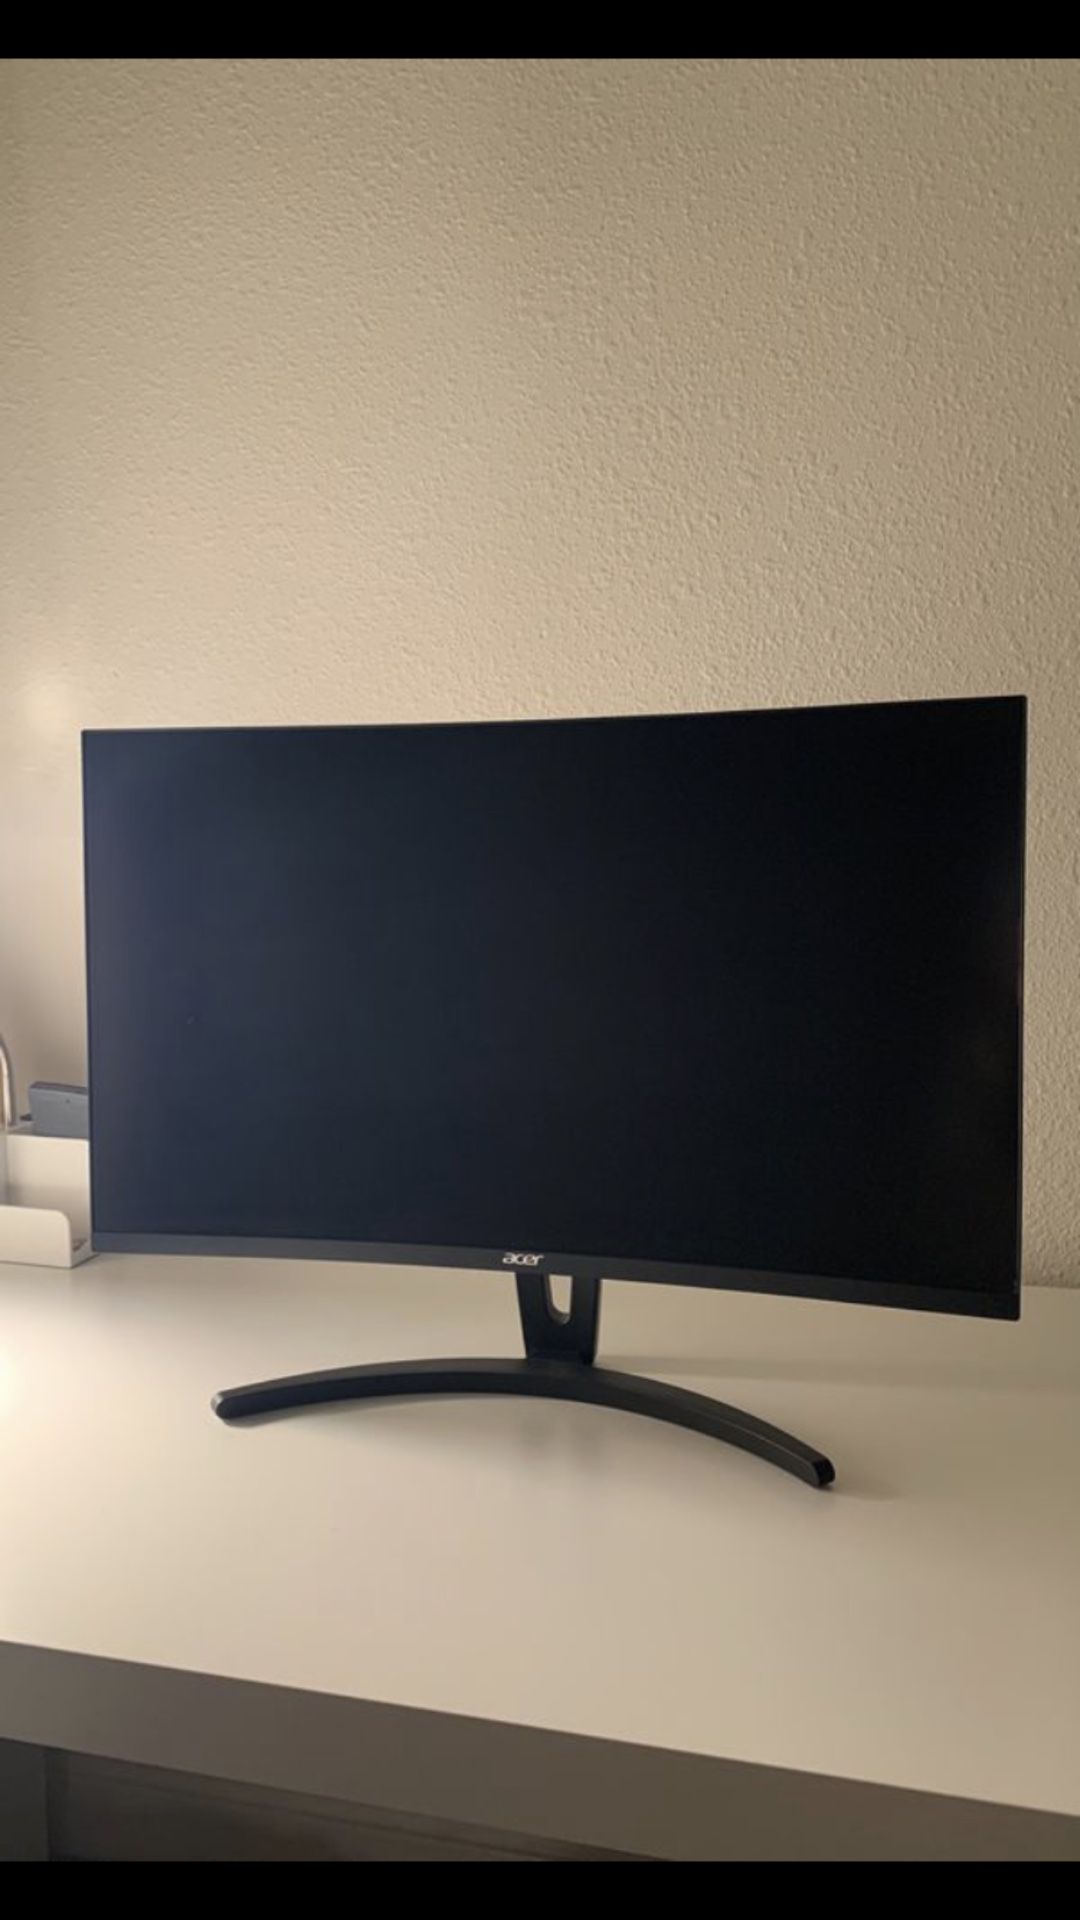 “27 Curved Acer 144Hz Monitor